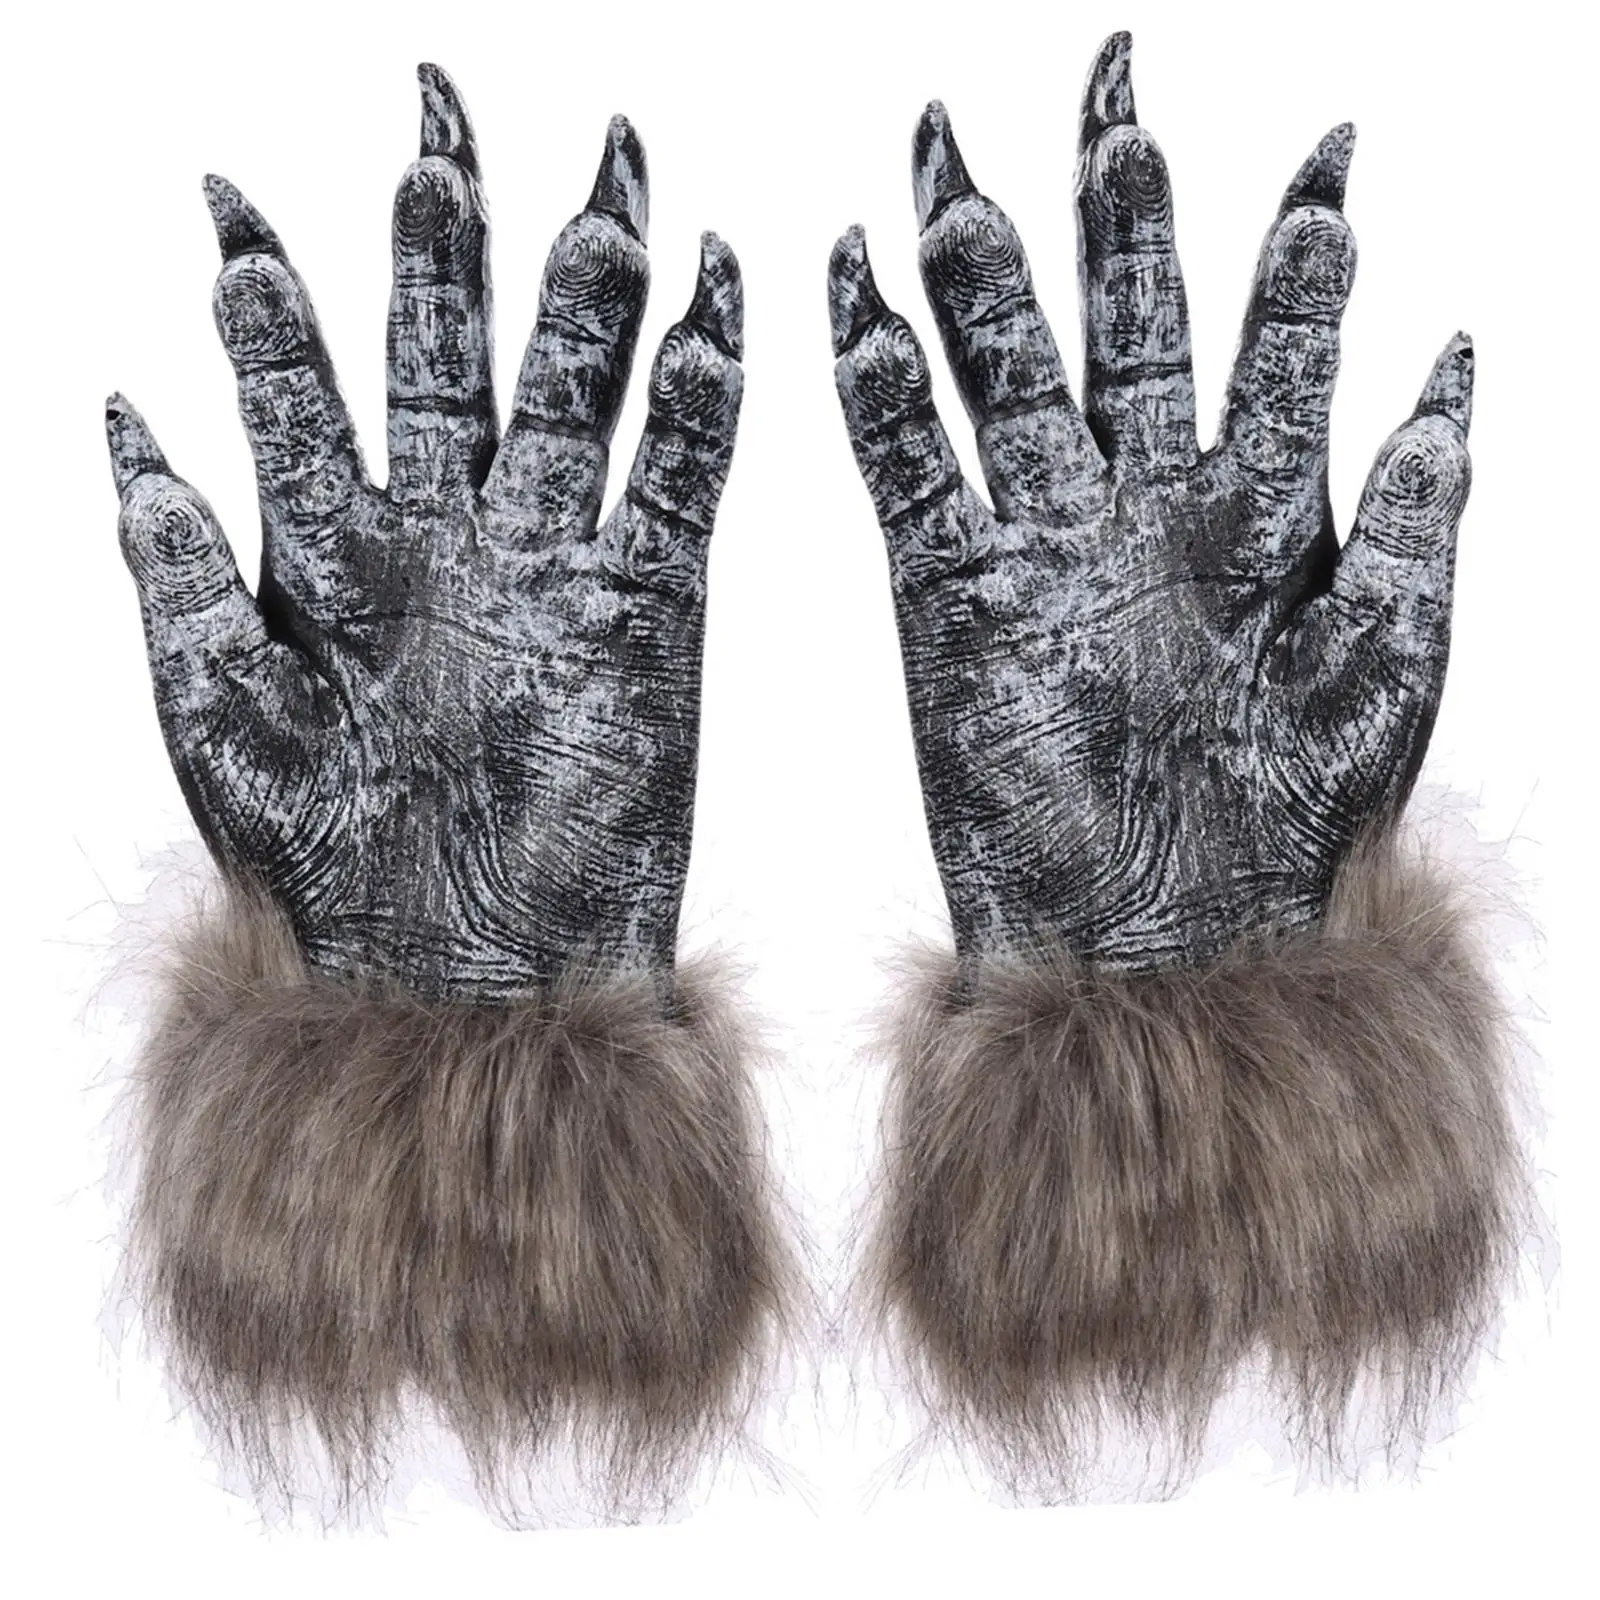 Long Nails Halloween Wolf Gloves Werewolf Costume Mitts Gift Pair Claw Gloves for Festival Accessories Cosplay Party Adult